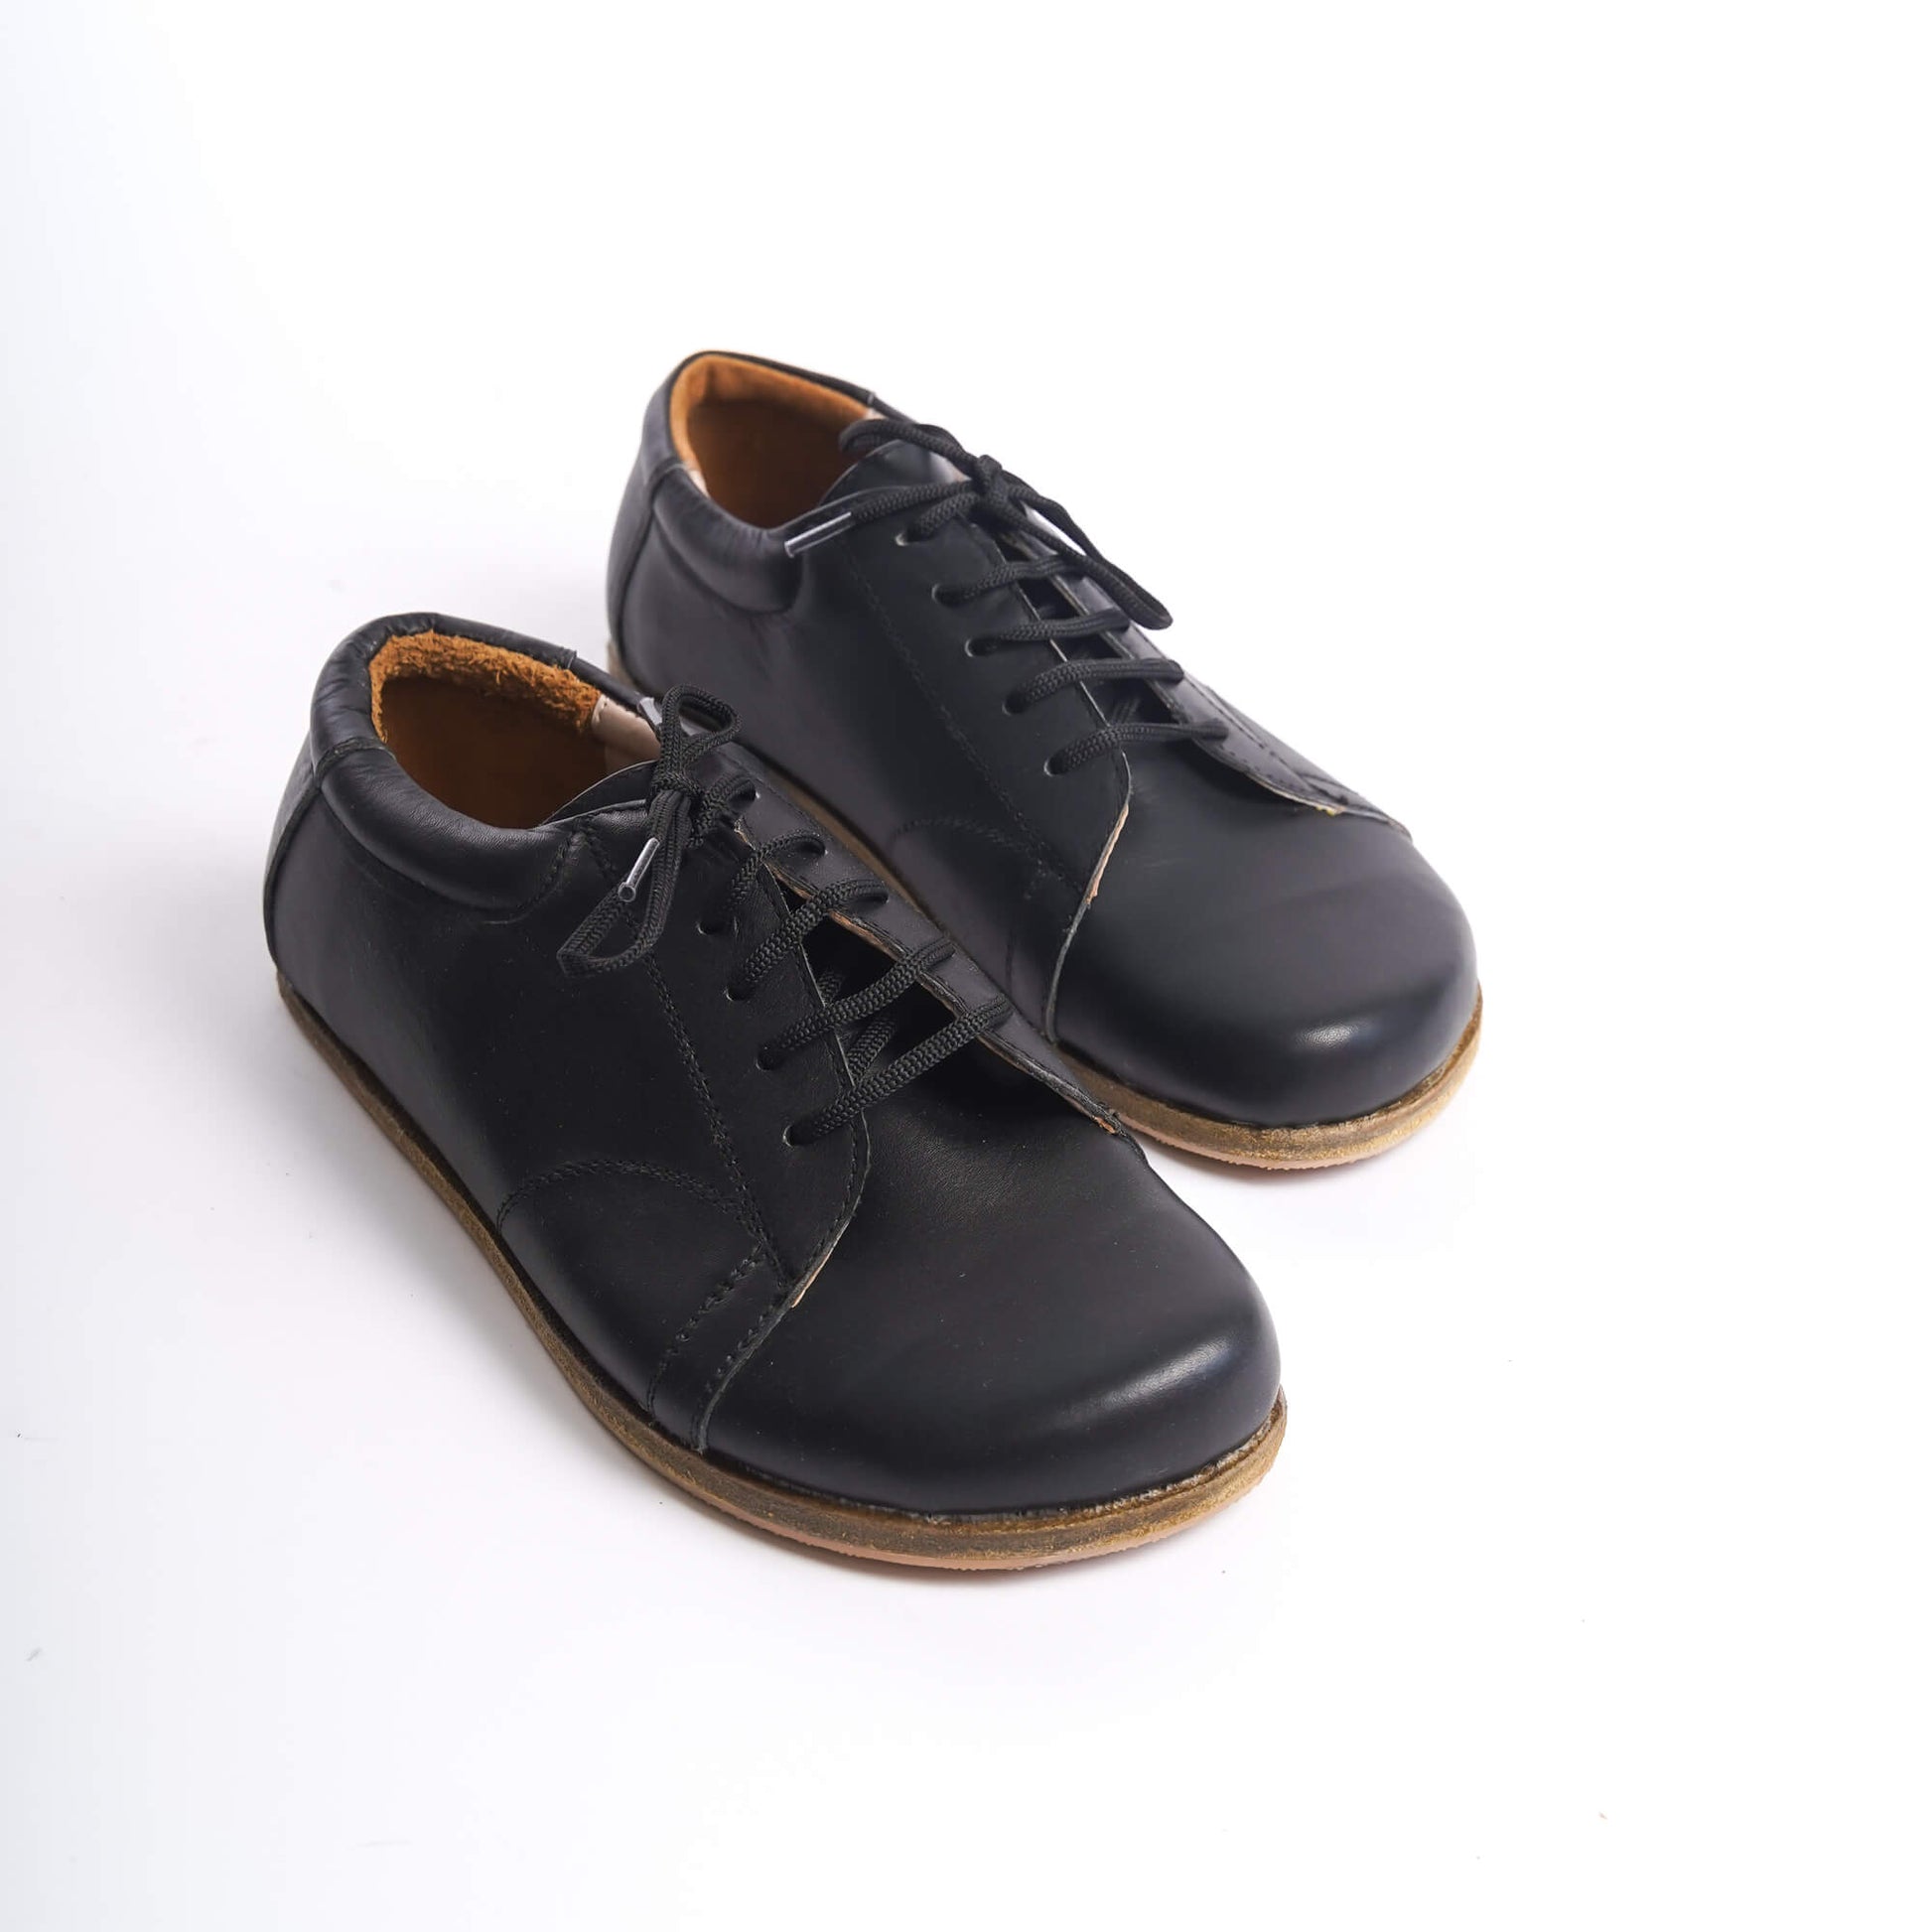 Black Lydia Leather Barefoot Women's Sneakers, close-up showcasing the classic design and quality leather.